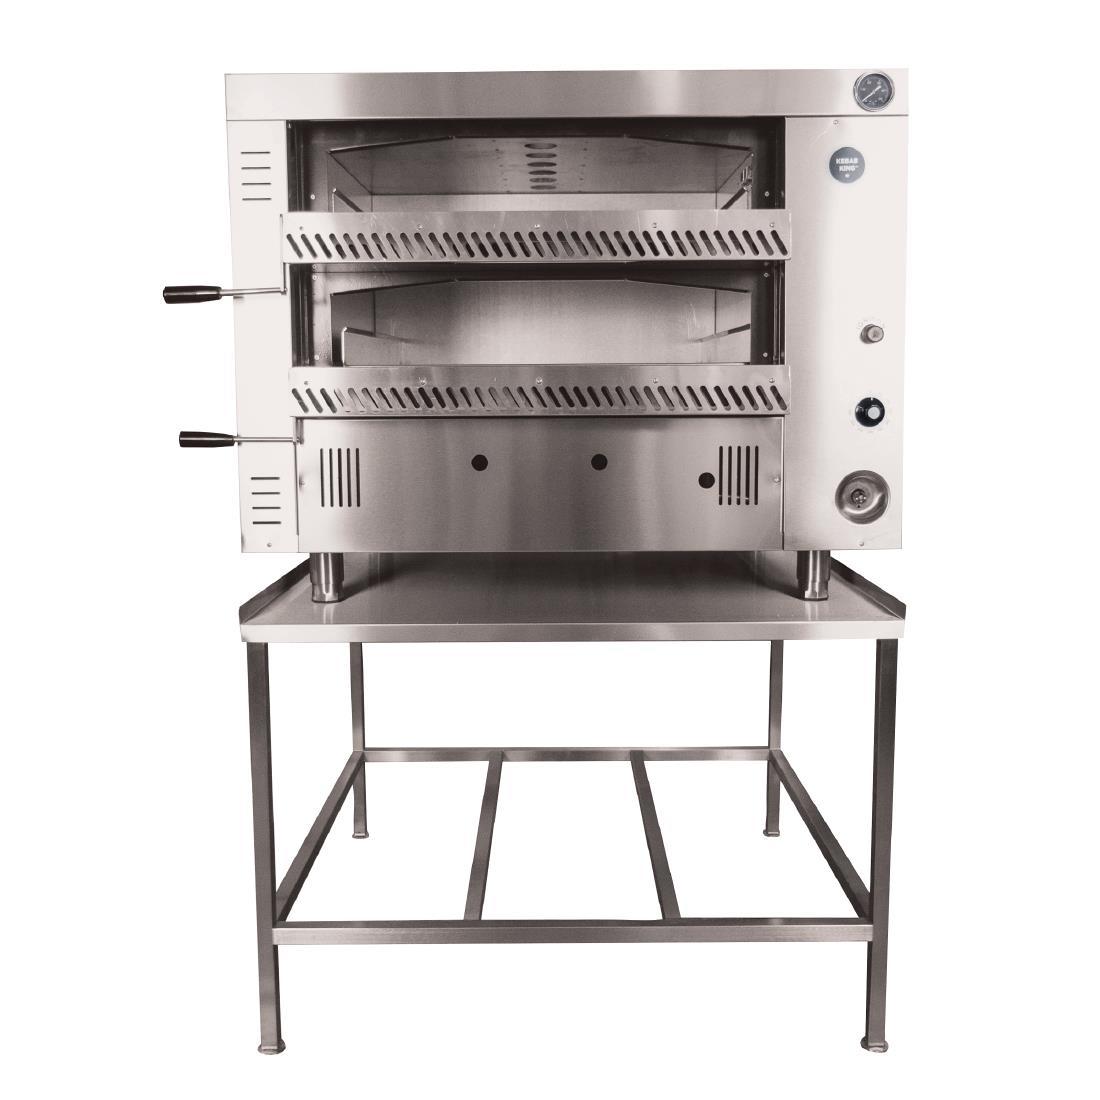 Kebab King 4 Oven Stand - FP747-N  - 1